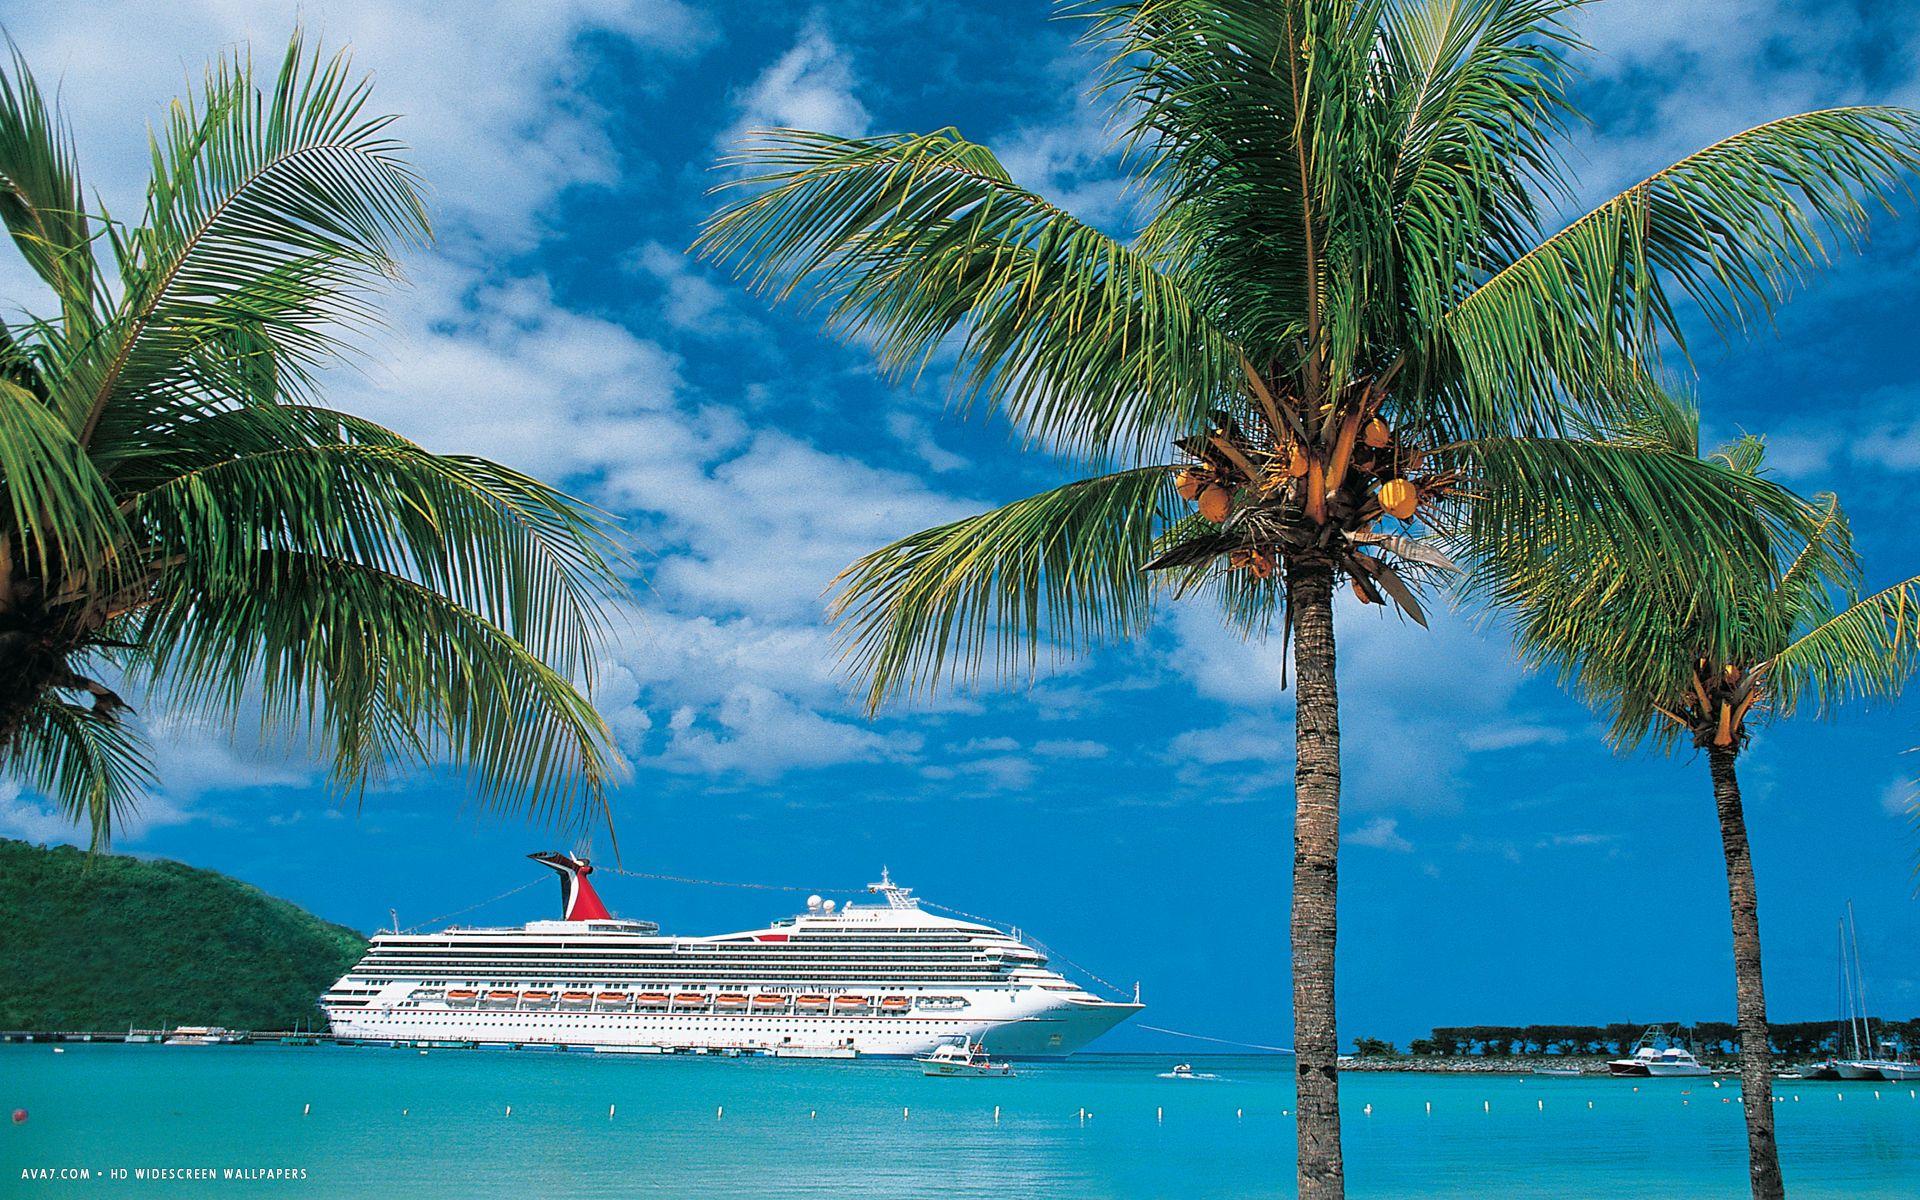 carnival victory cruise ship hd widescreen wallpapers / cruise